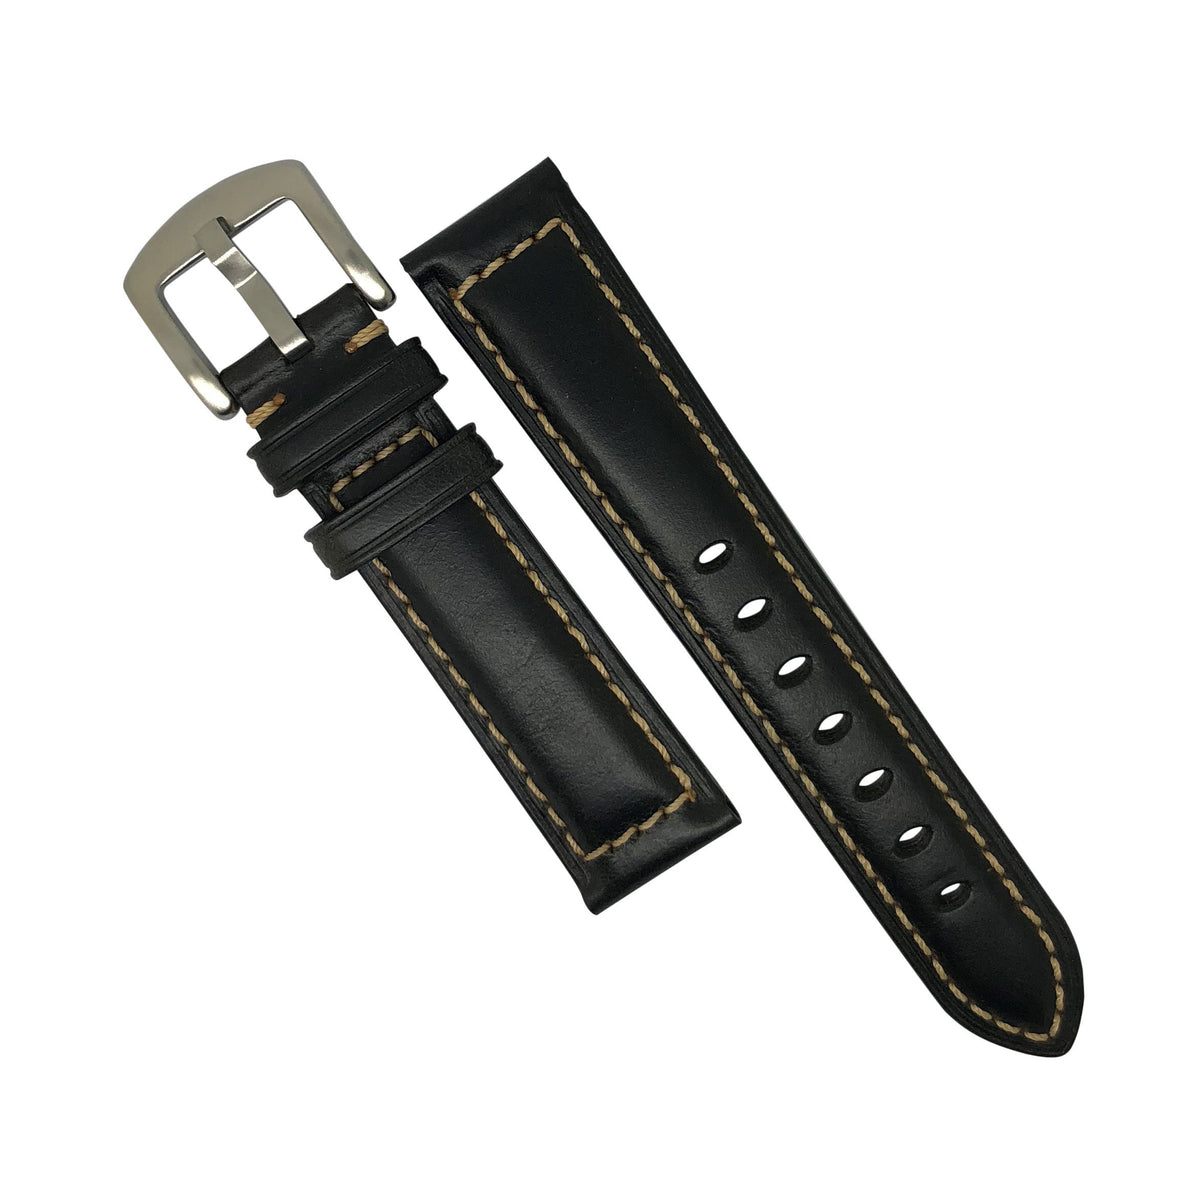 M2 Oil Waxed Leather Watch Strap in Black with Silver Buckle (20mm) - Nomad Watch Works Malaysia